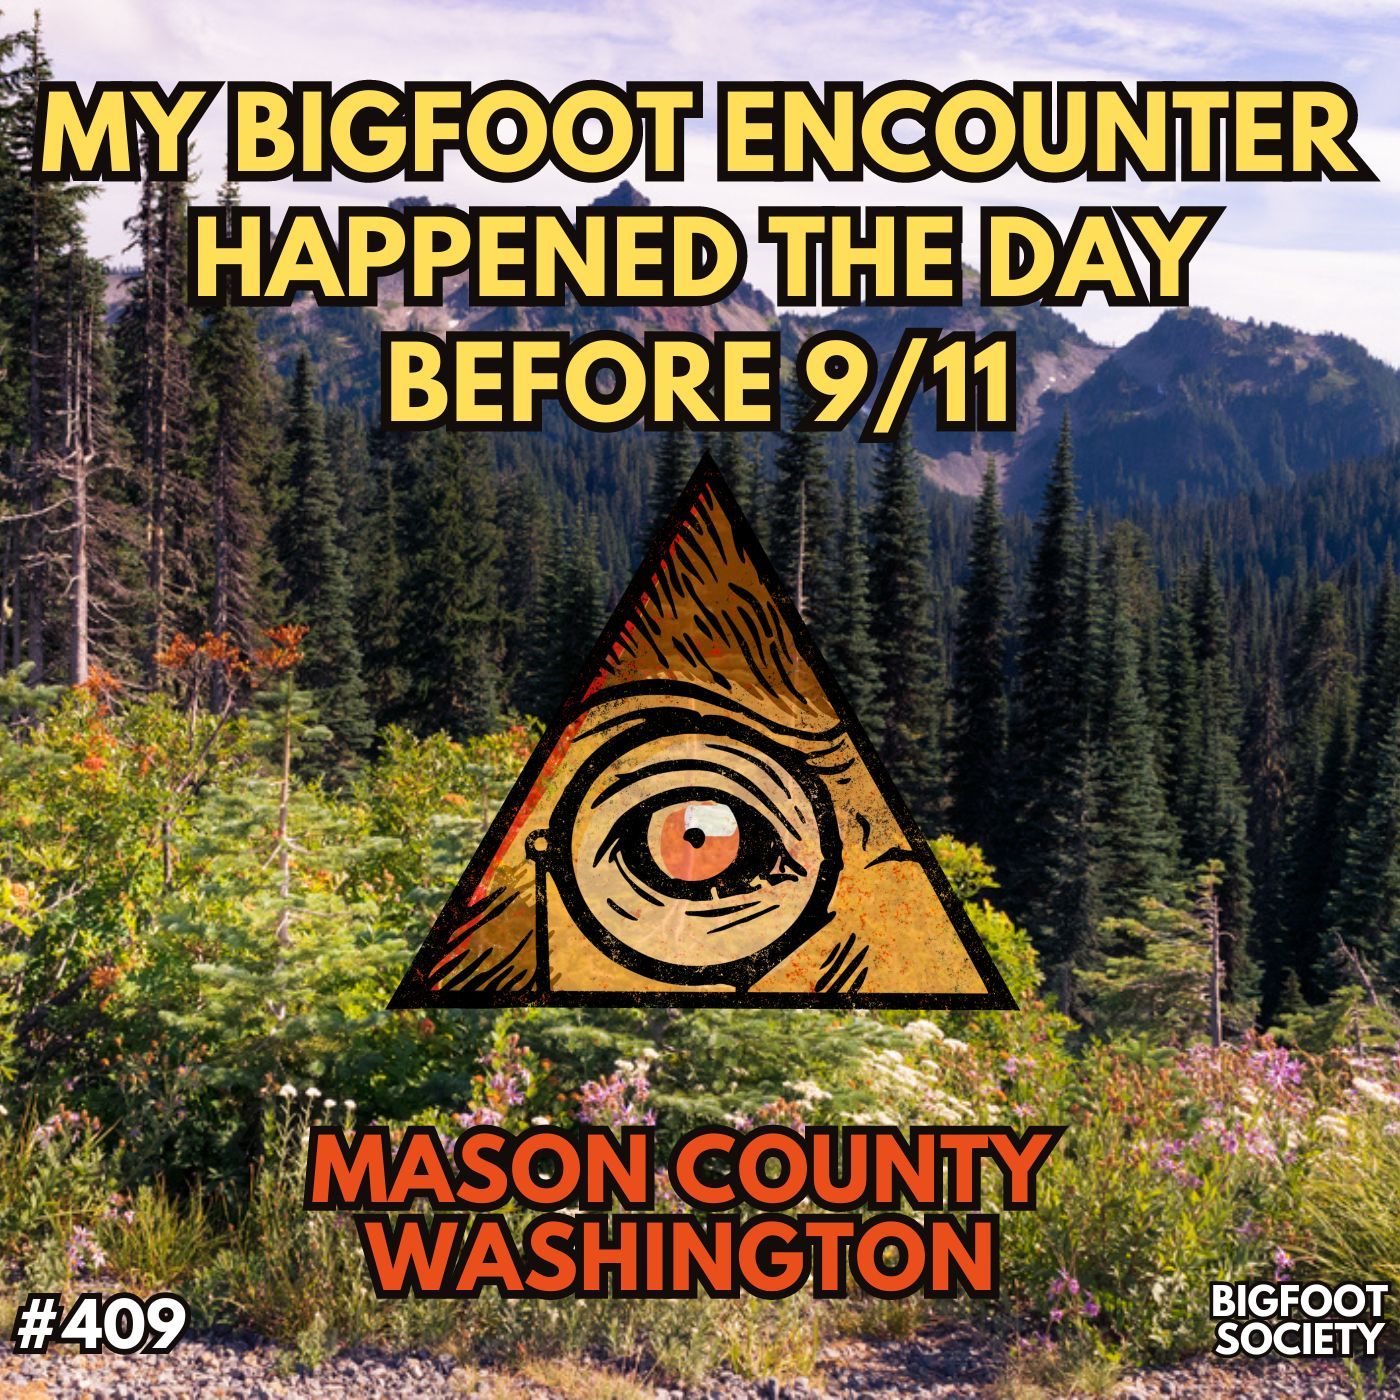 My Bigfoot Encounter Happened the Day Before 9/11!